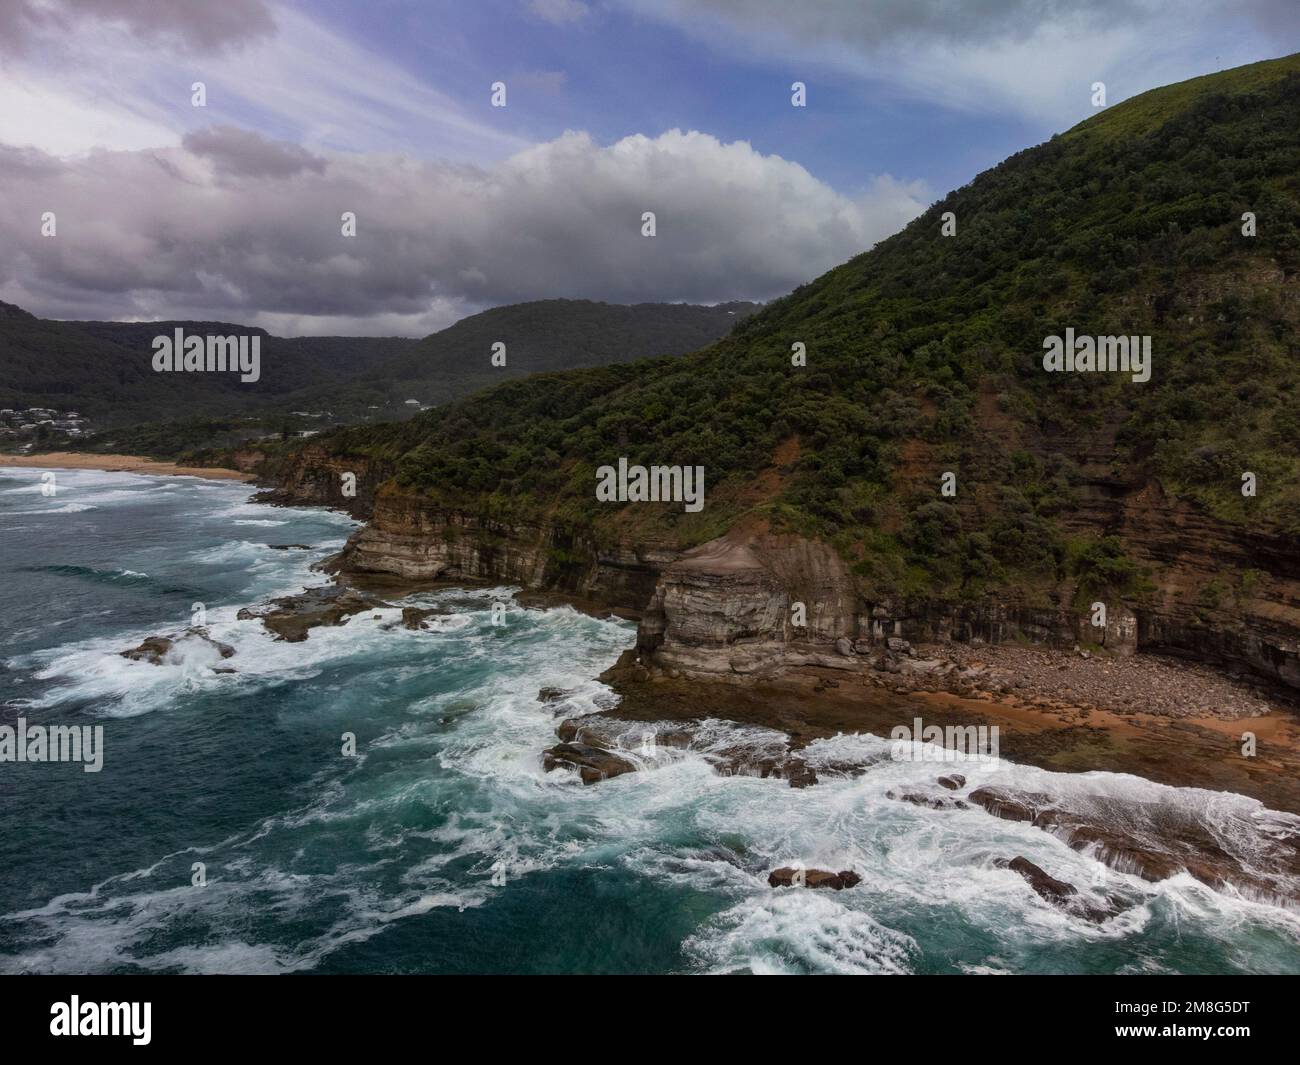 A scenic view of evergreen cliffs surrounding the beautiful ocean in Stanwell Park beach, Australia Stock Photo